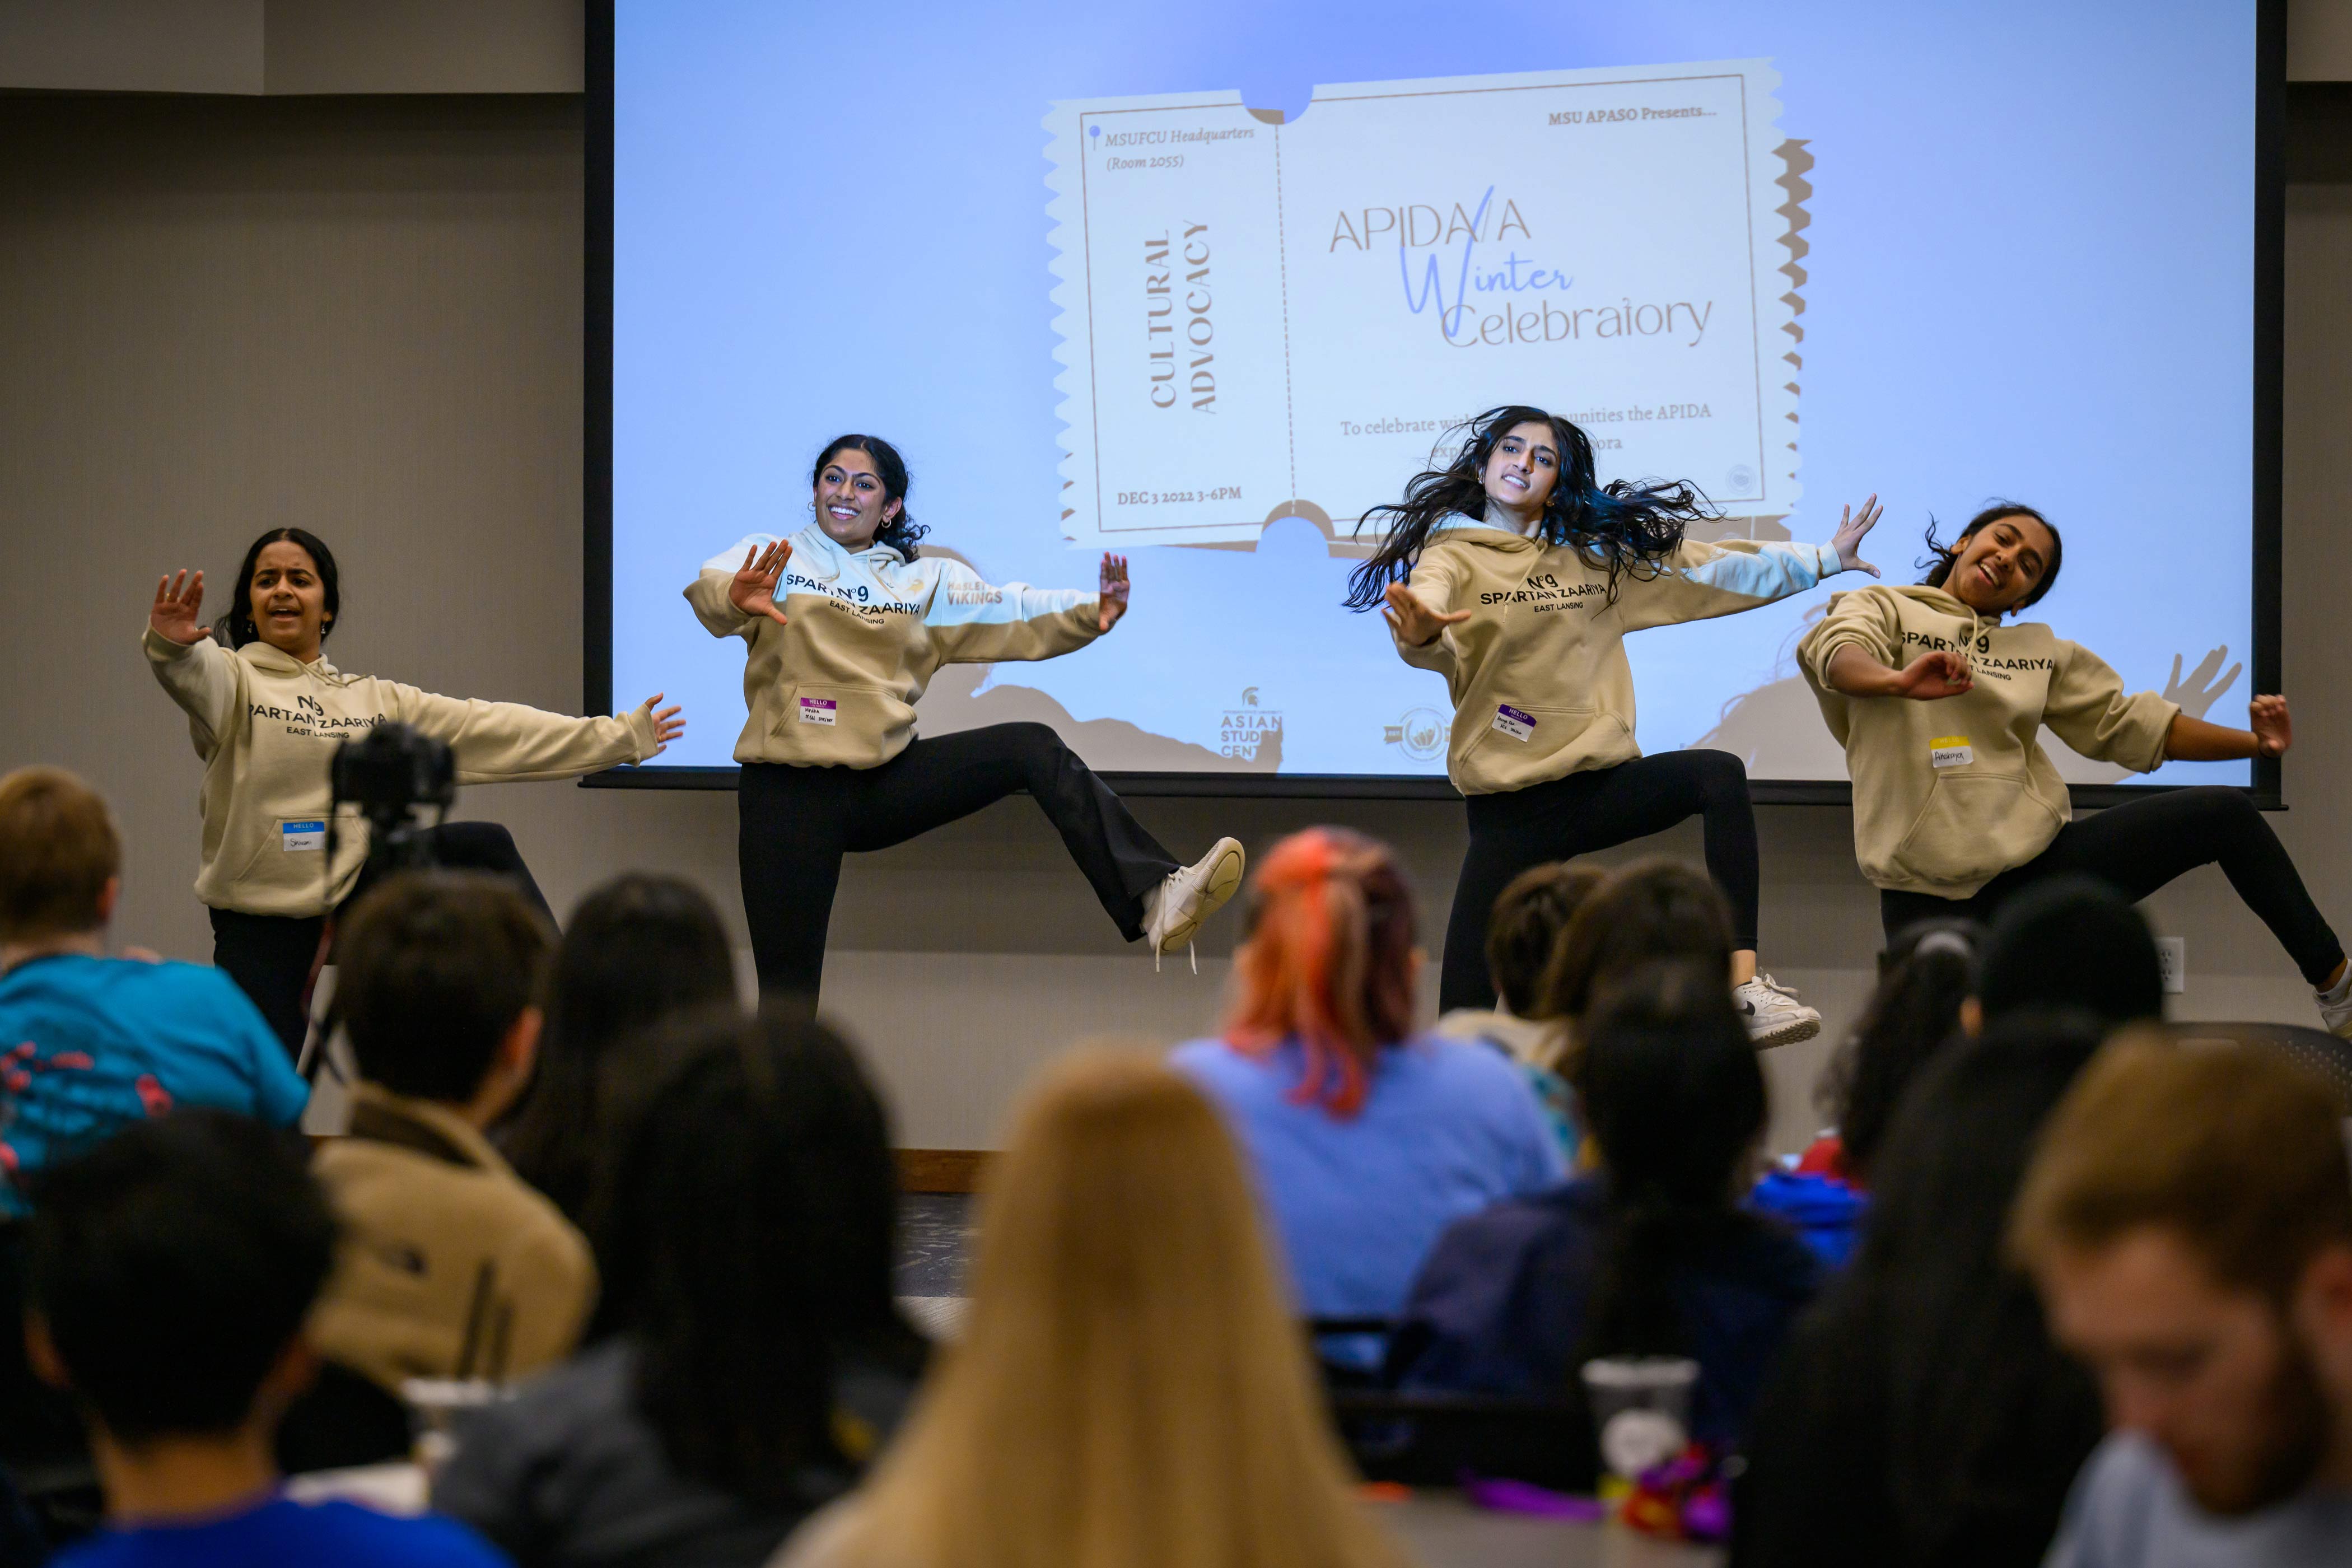 Four students performing a dance in front of APIDA/A Winter Celebratory projection